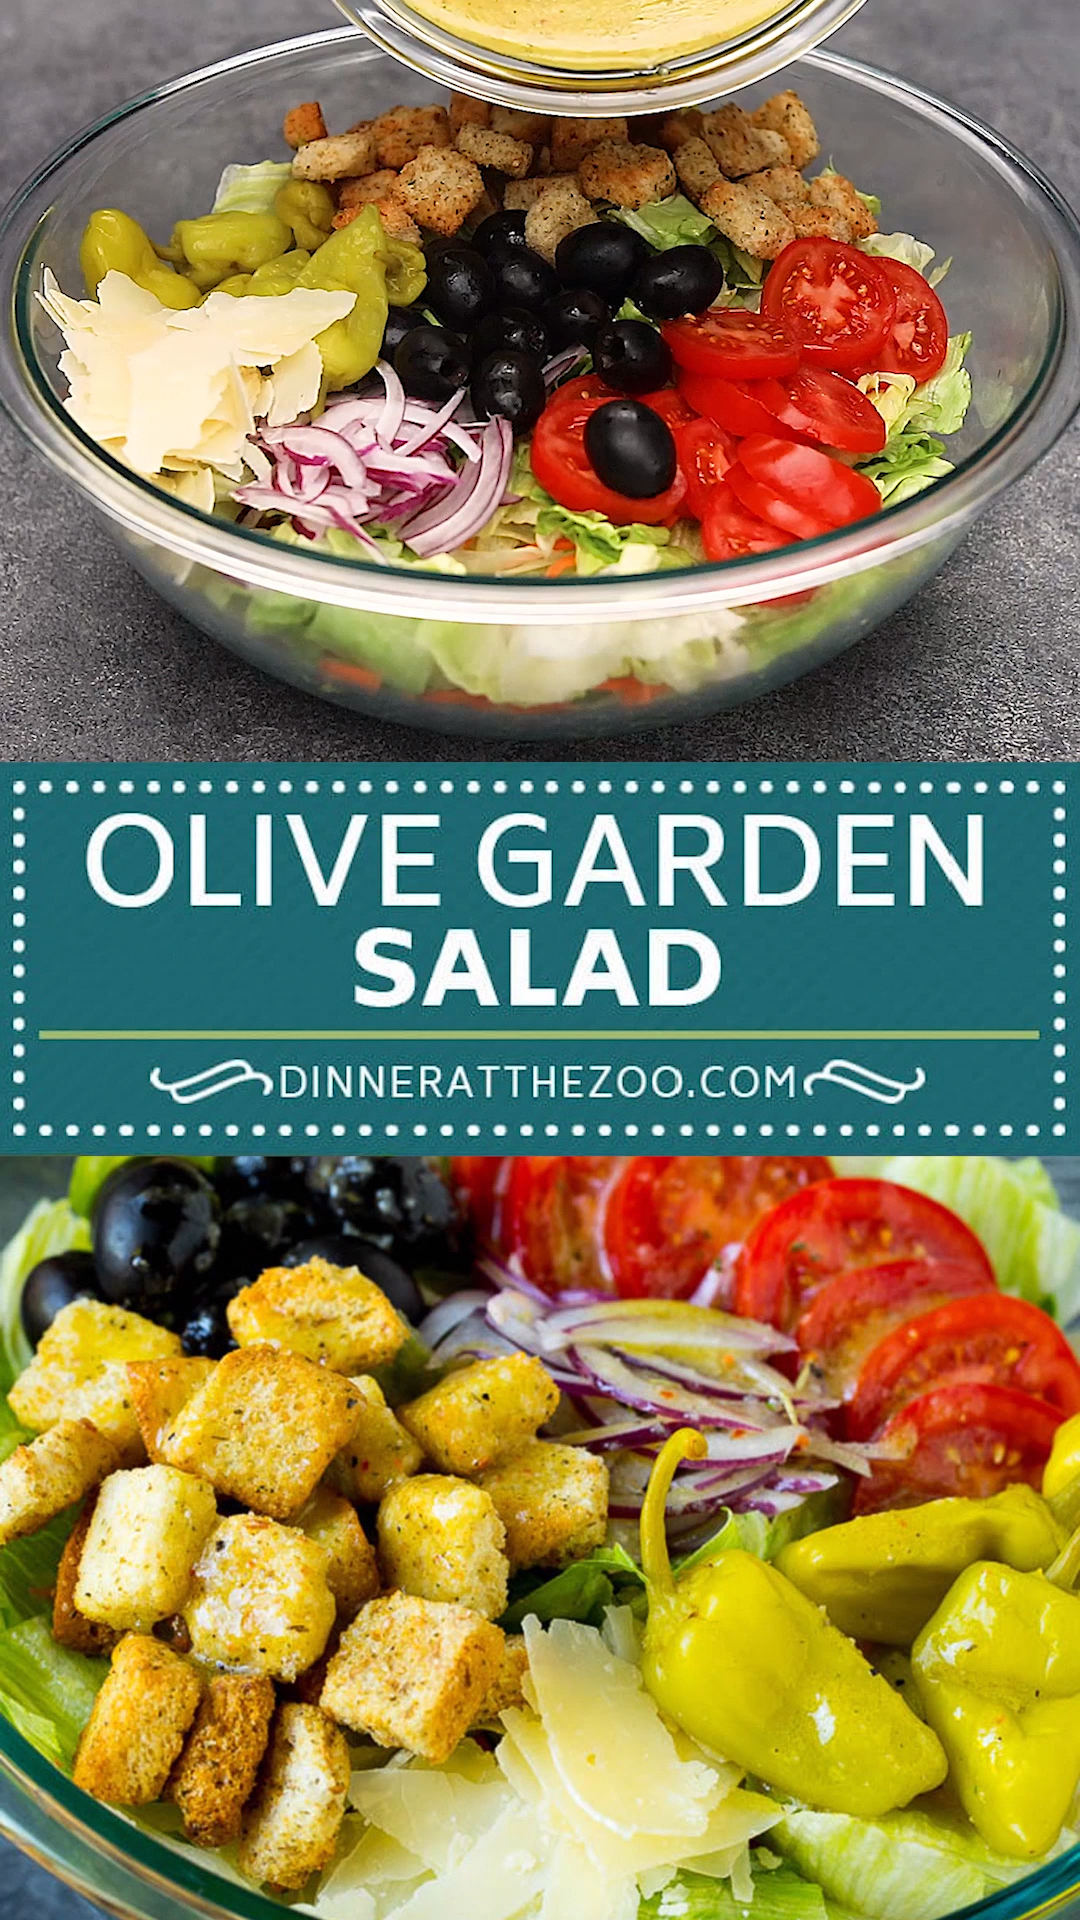 Olive Garden Soup And Salad Price